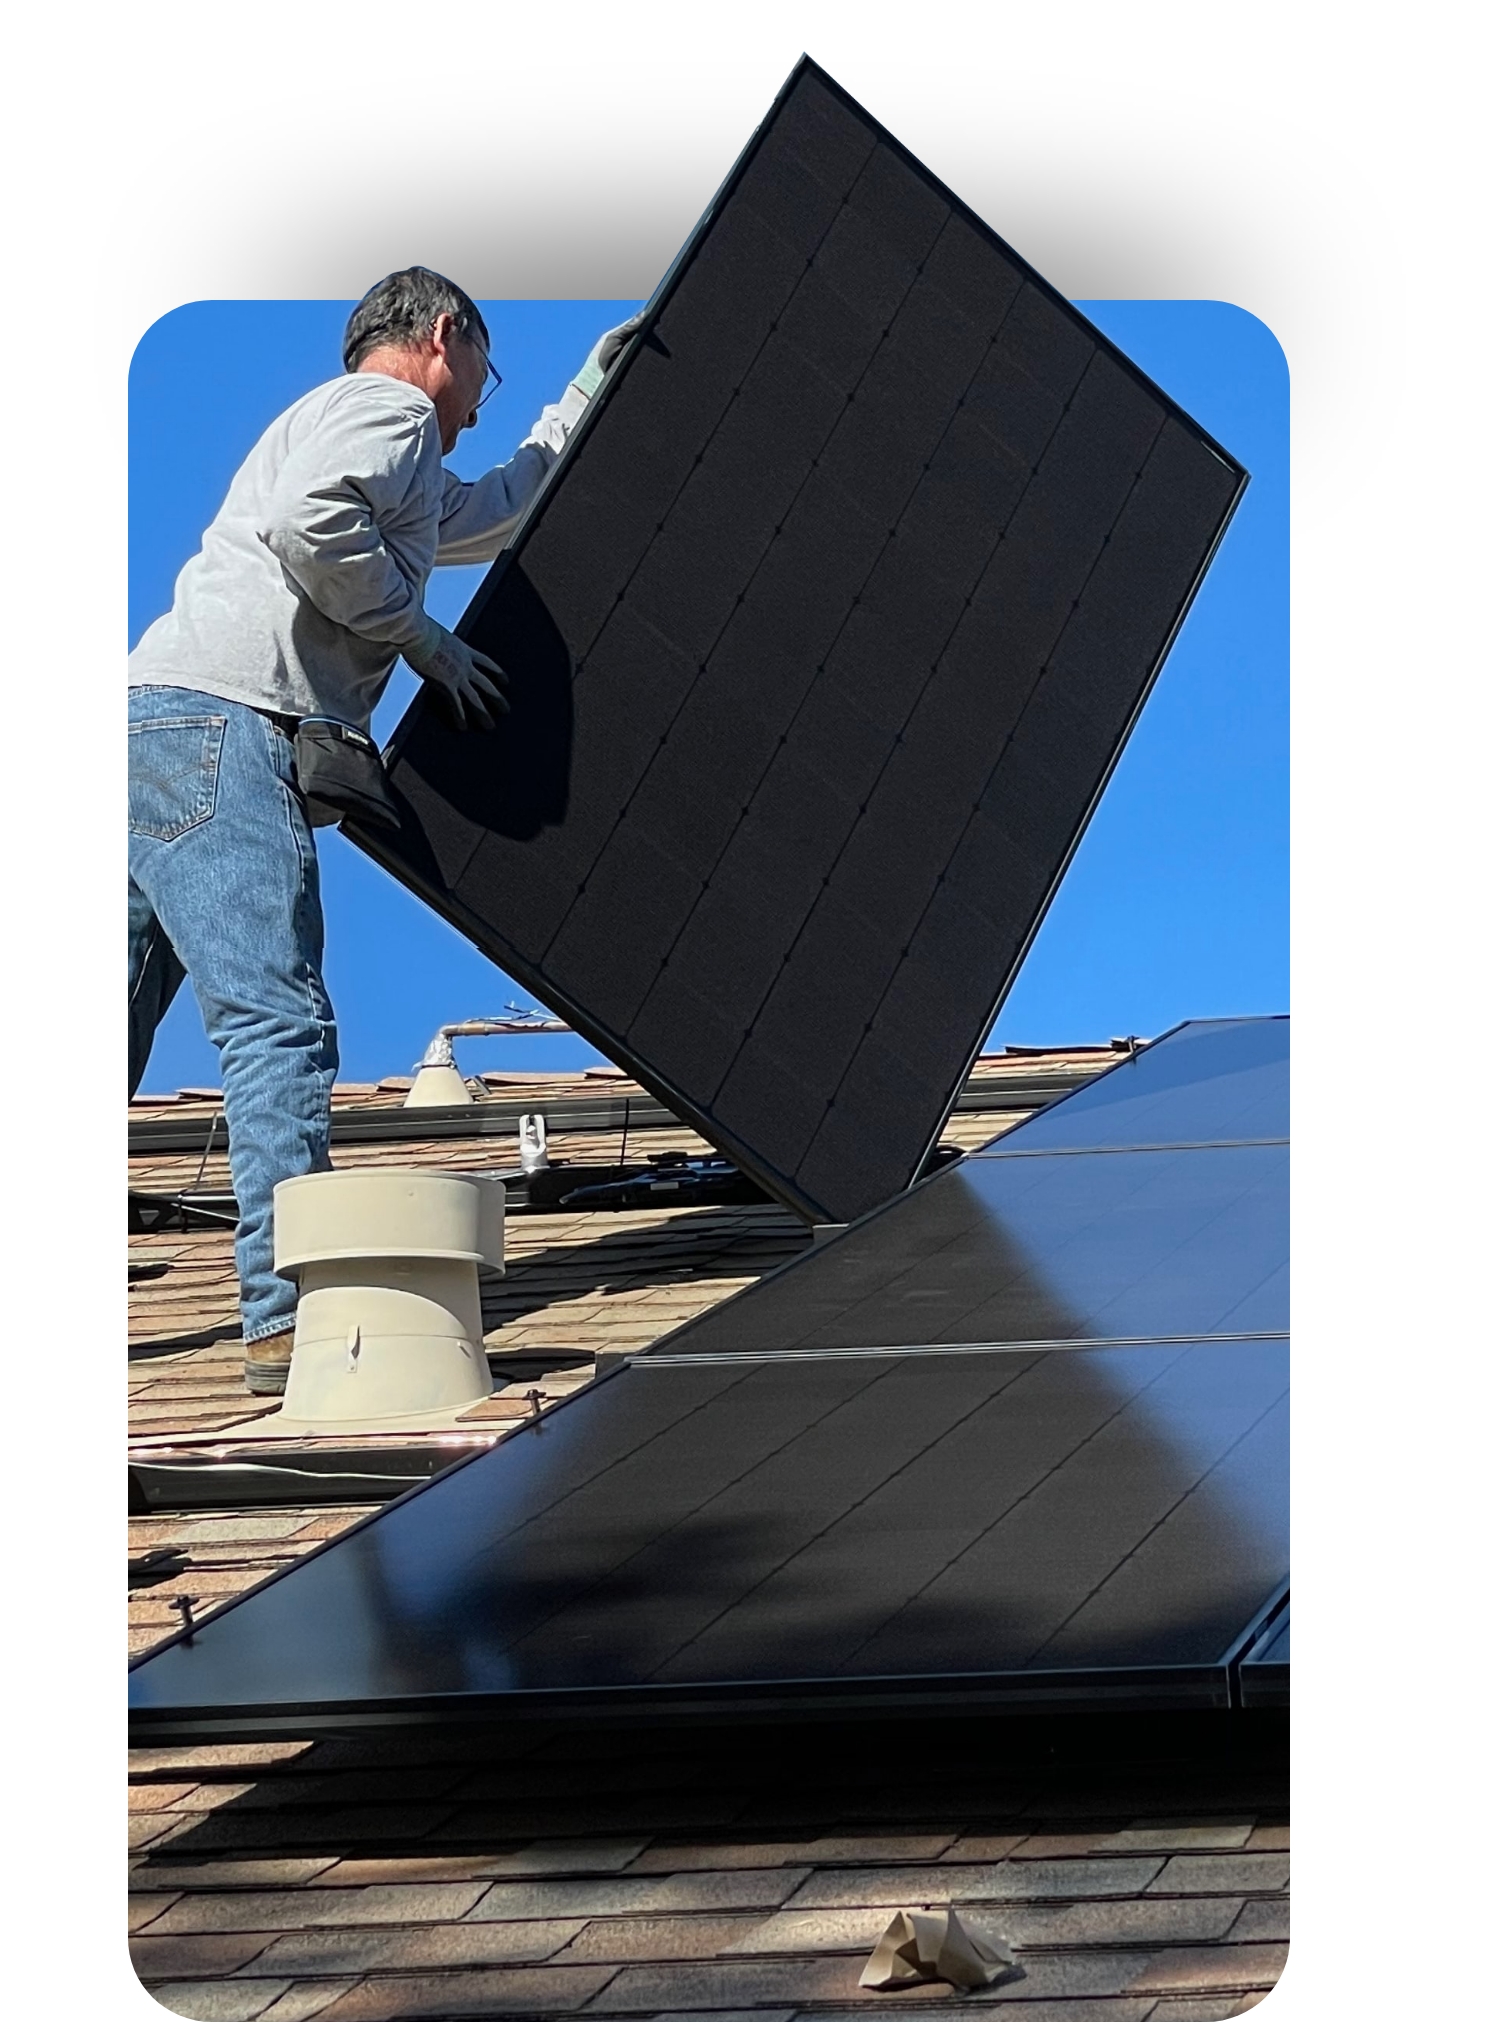 Our solar business is a local member of the community. Trust us for your solar panel installation.